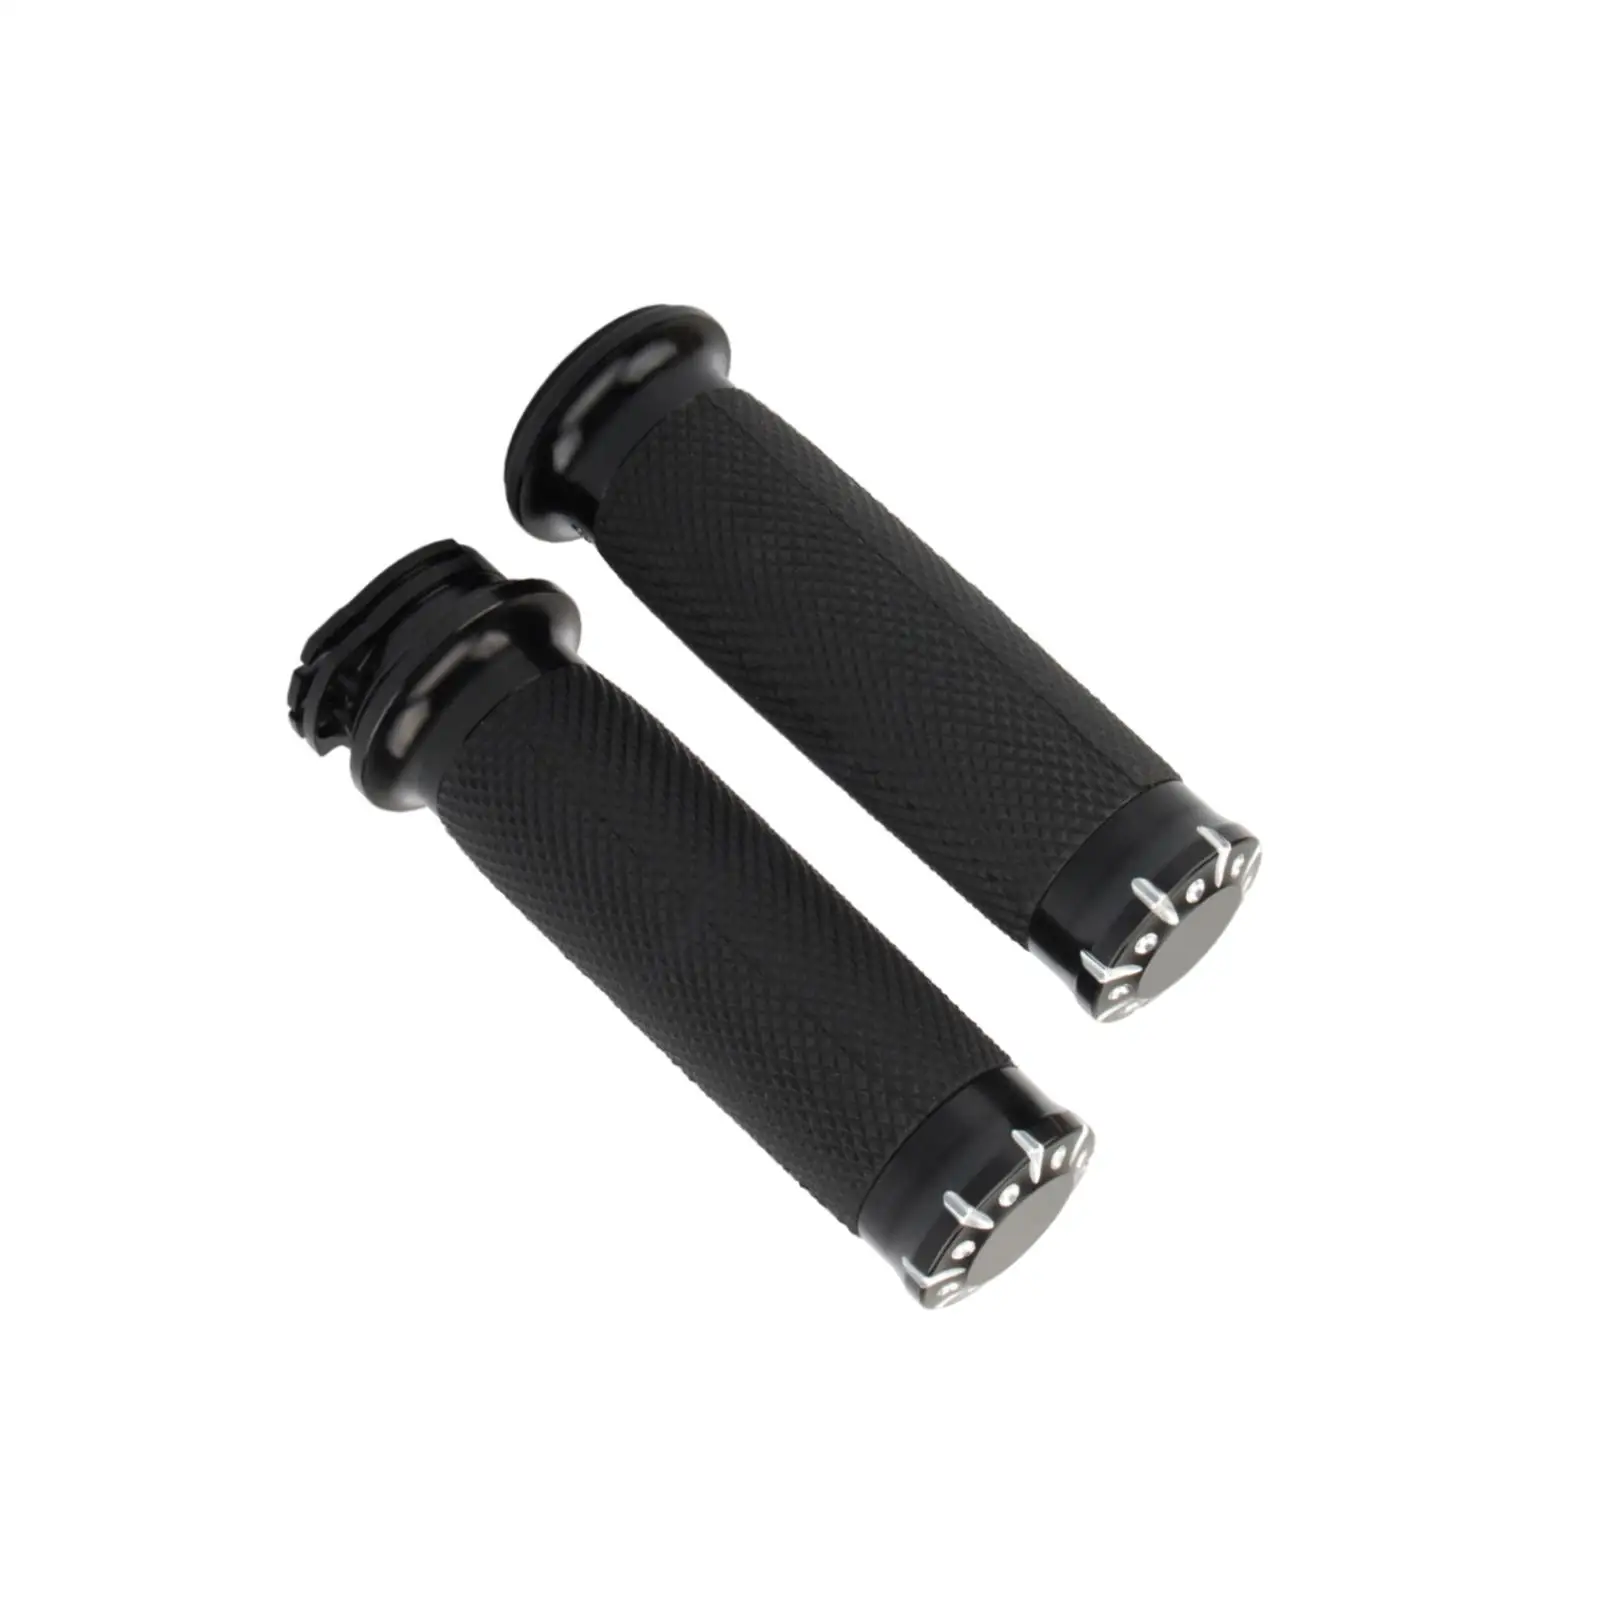 Hand Grips 25mm Durable Comfort with Bar End Handlebar Cover for